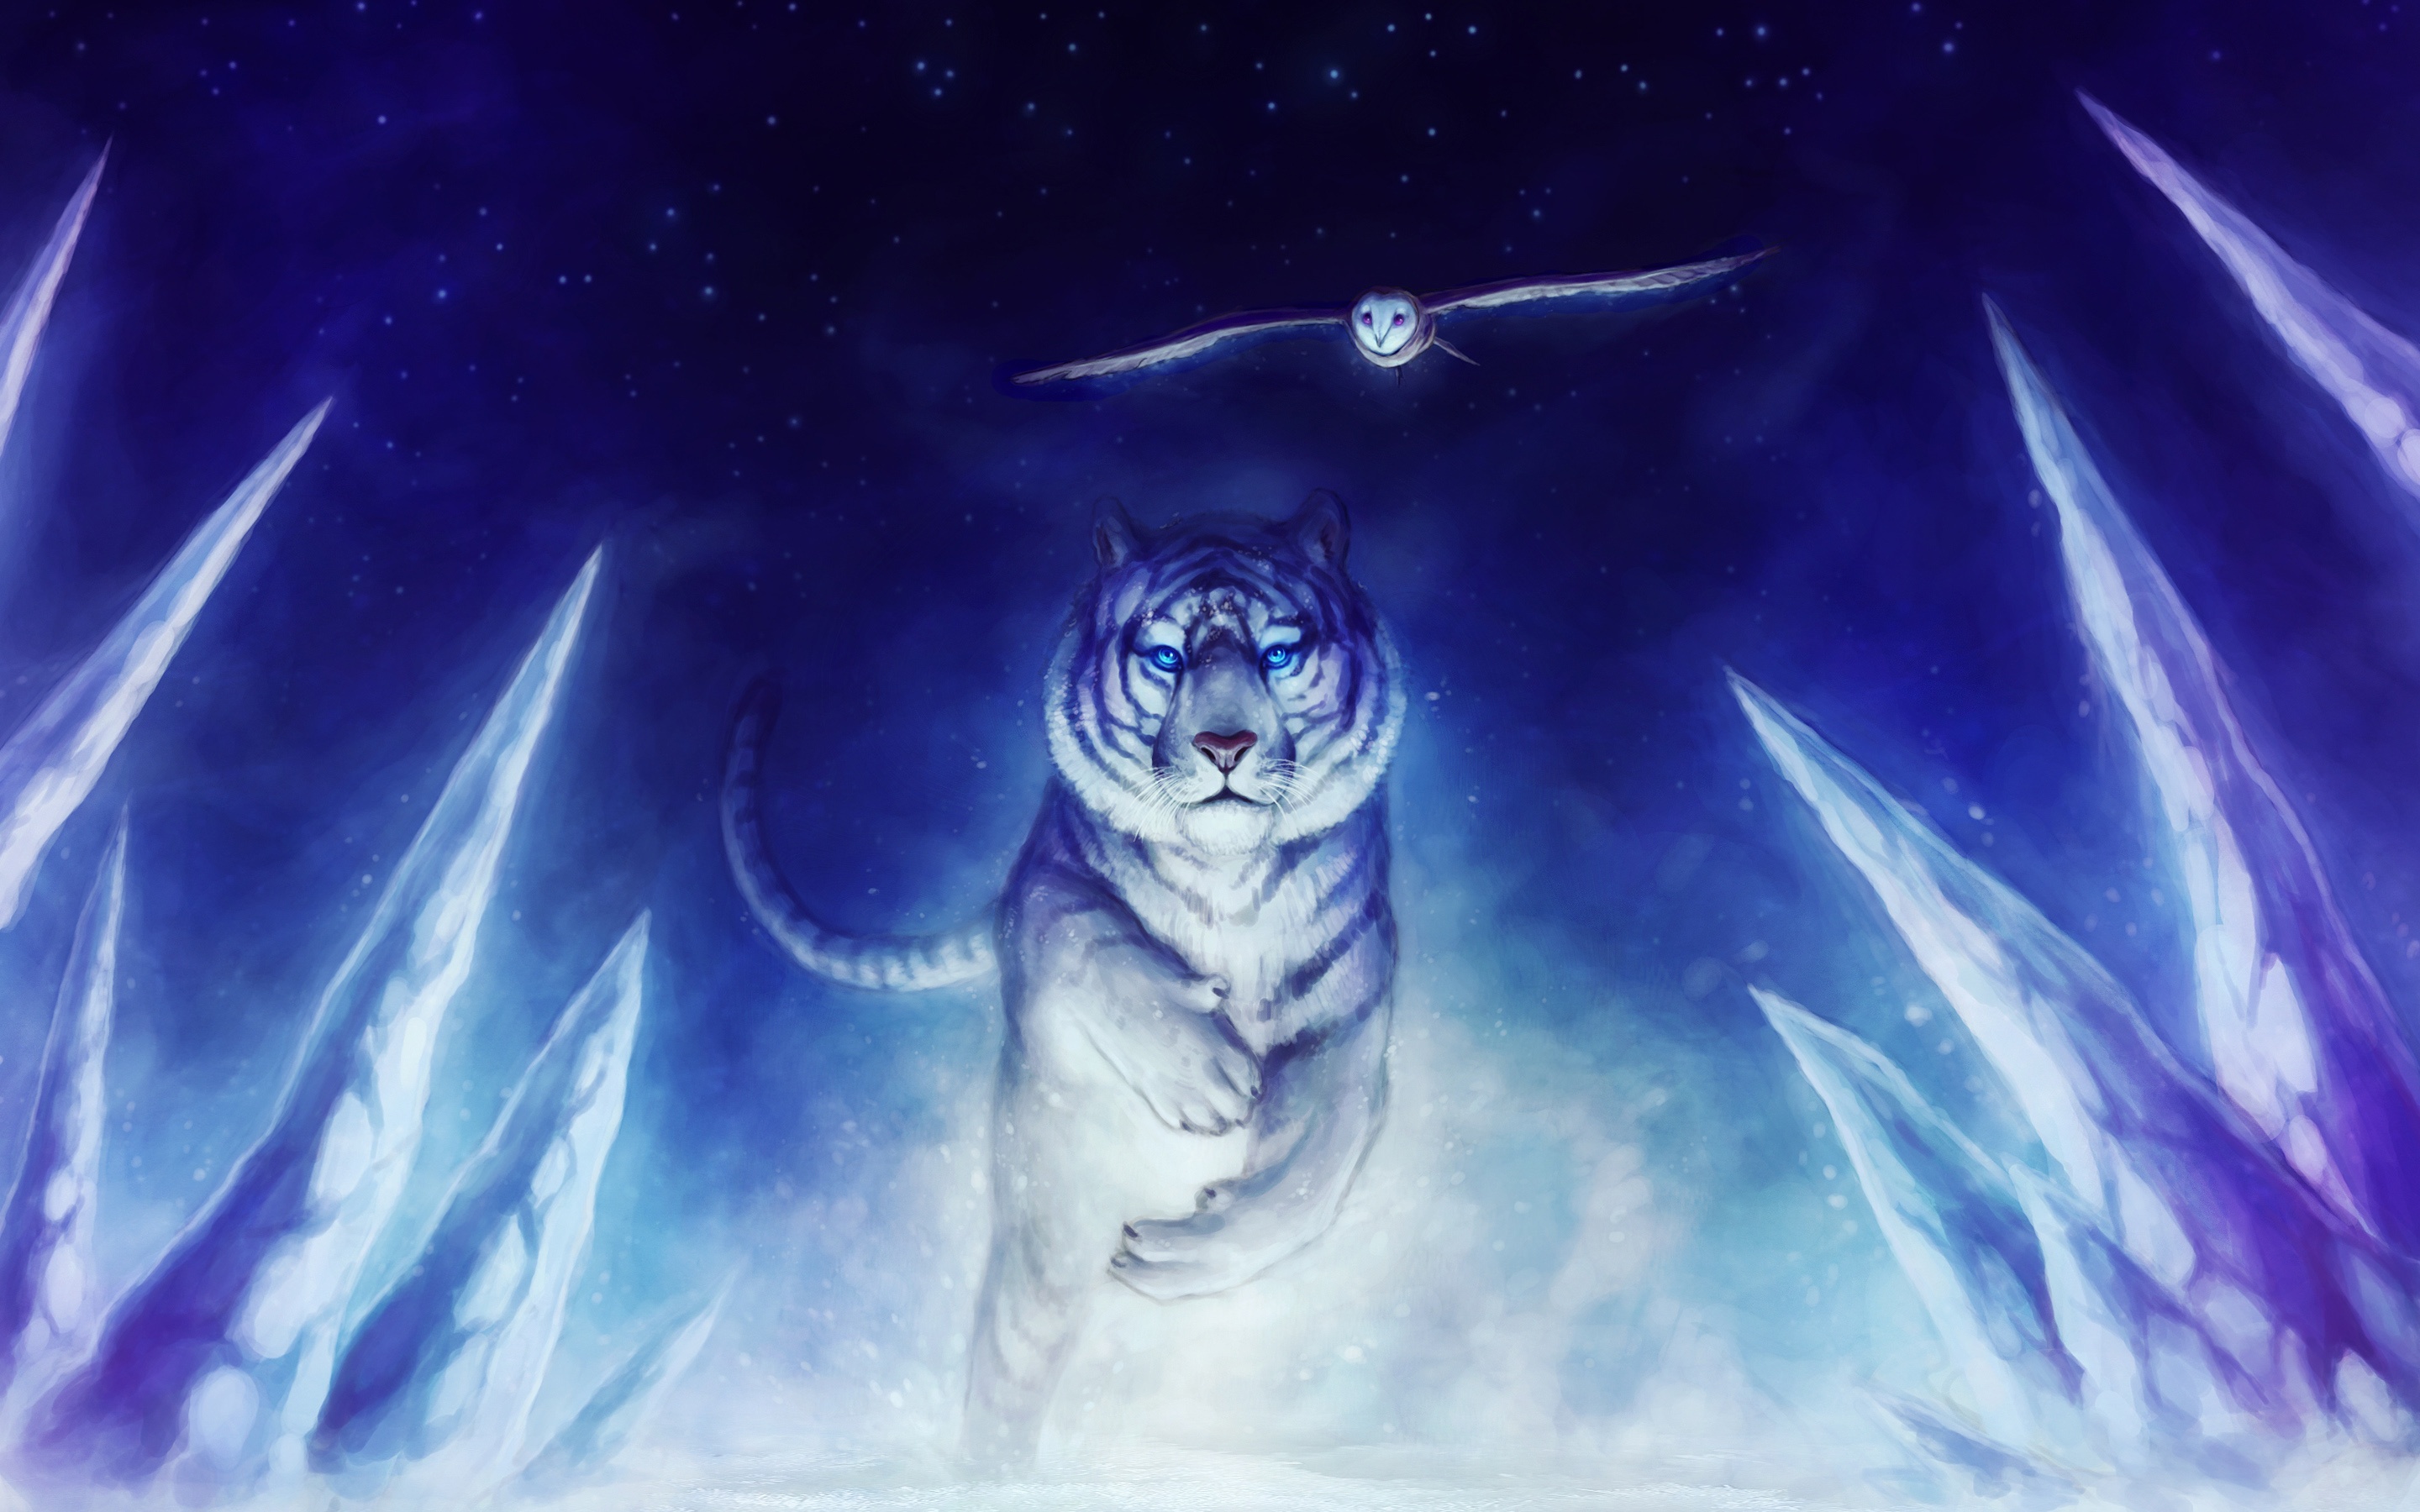 White Tiger Owl Art - Cool White Tiger Backgrounds - 2880x1800 Wallpaper -  